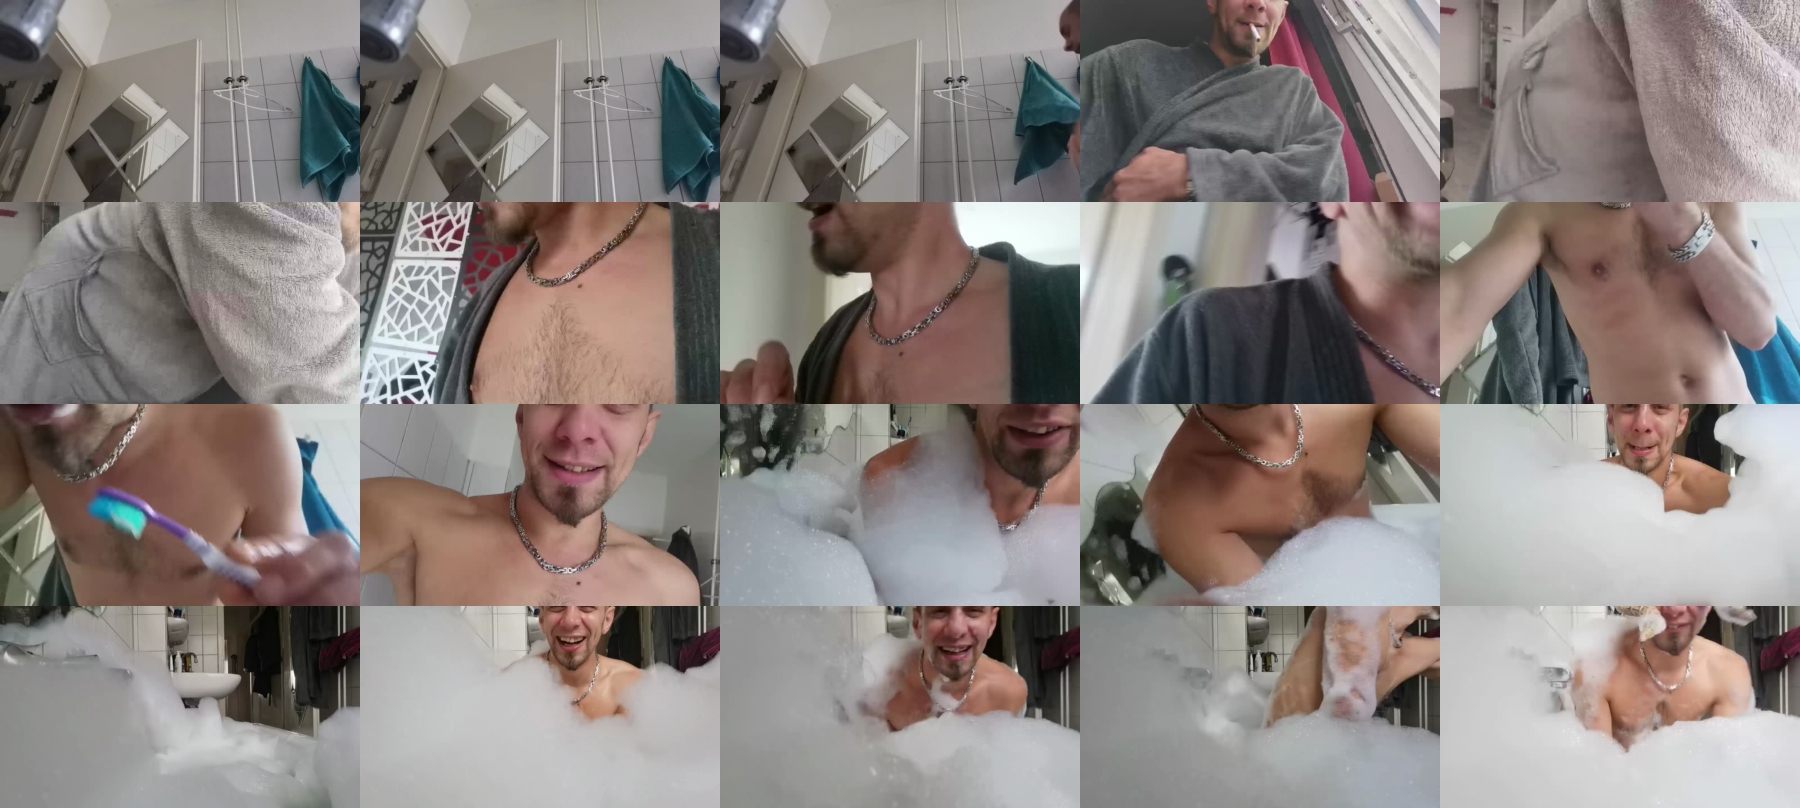 johnguy32  11-11-2021 Recorded Video Porn